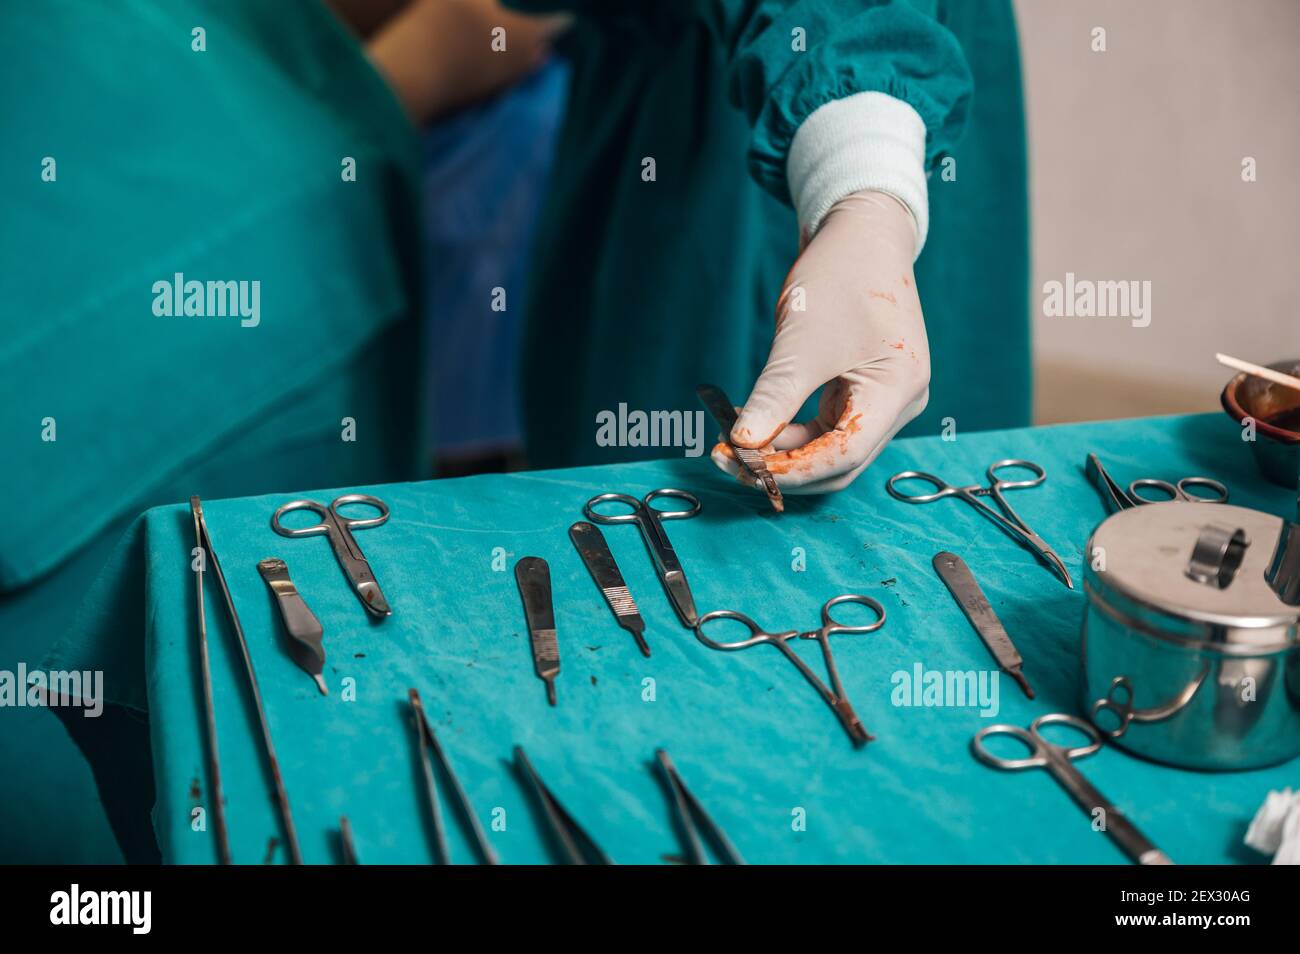 Surgeon hand wearing medical glove choosing surgical instrument on table in the operating room Stock Photo